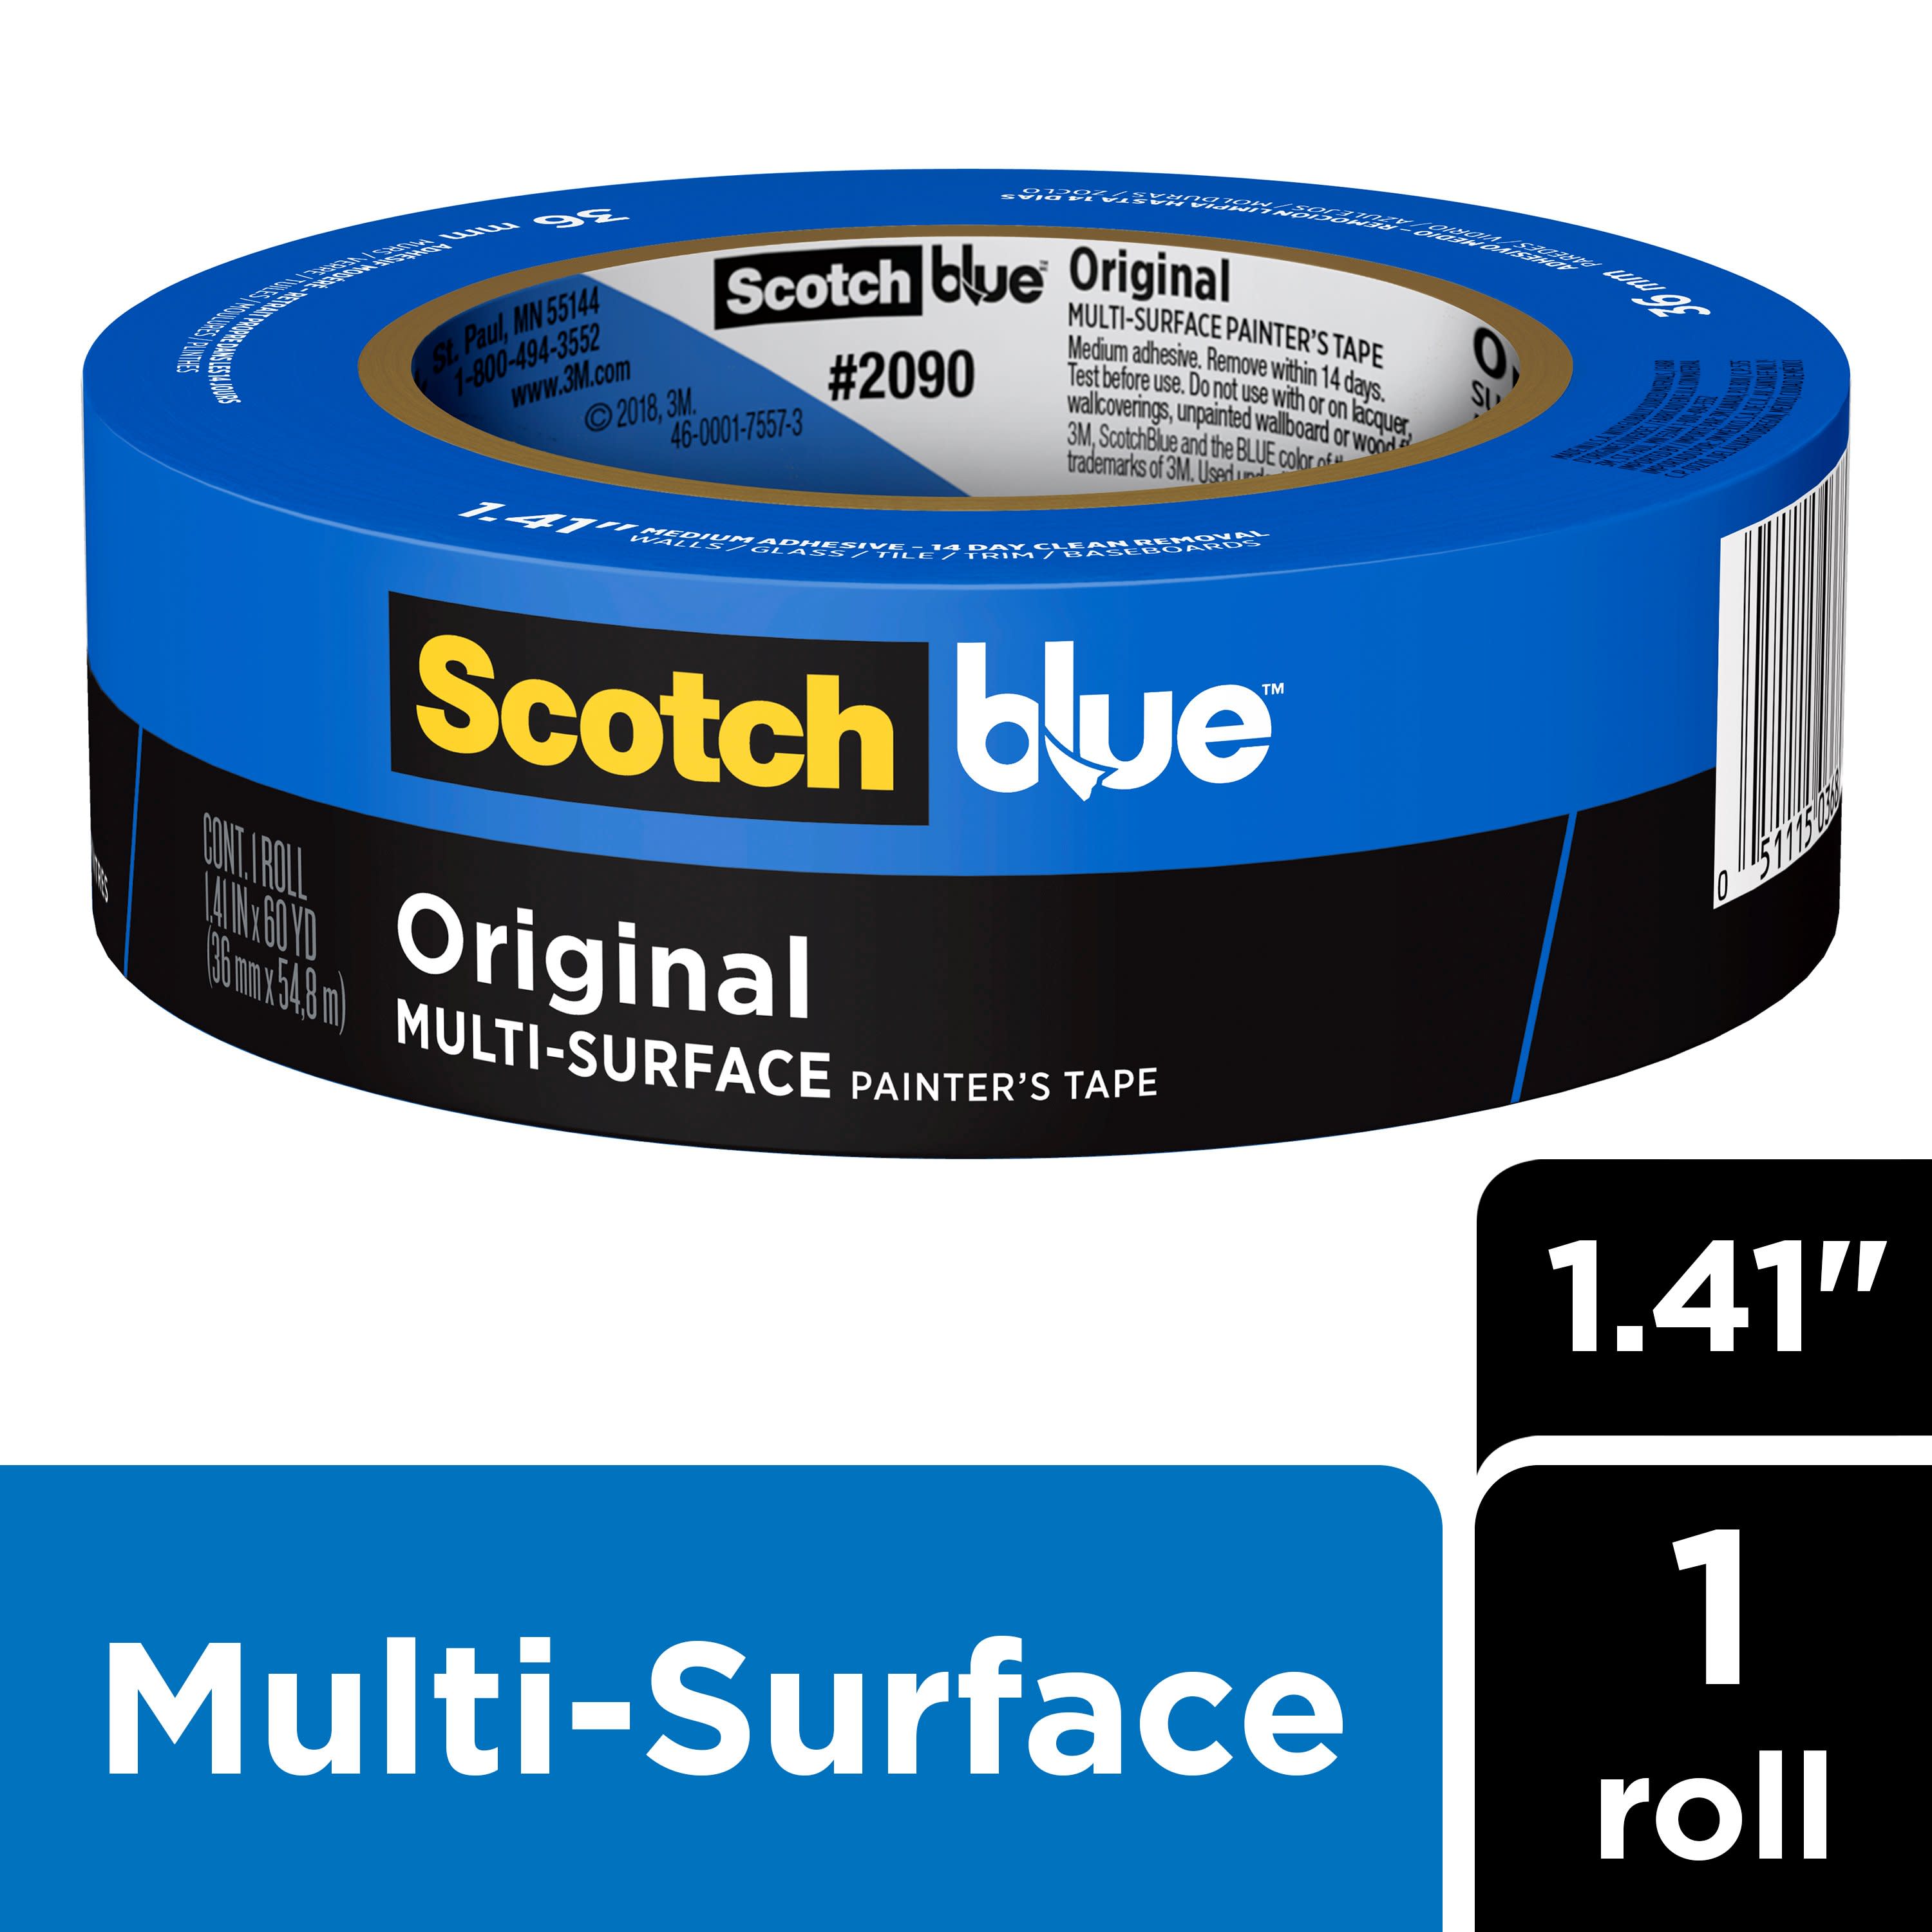 Generic Blue Painters Tape 1 inch Wide, Blue Masking Tape 1 inch x 55 Yards x 2 Rolls, Blue Tape for Arts Crafts Painting Labeling Deco